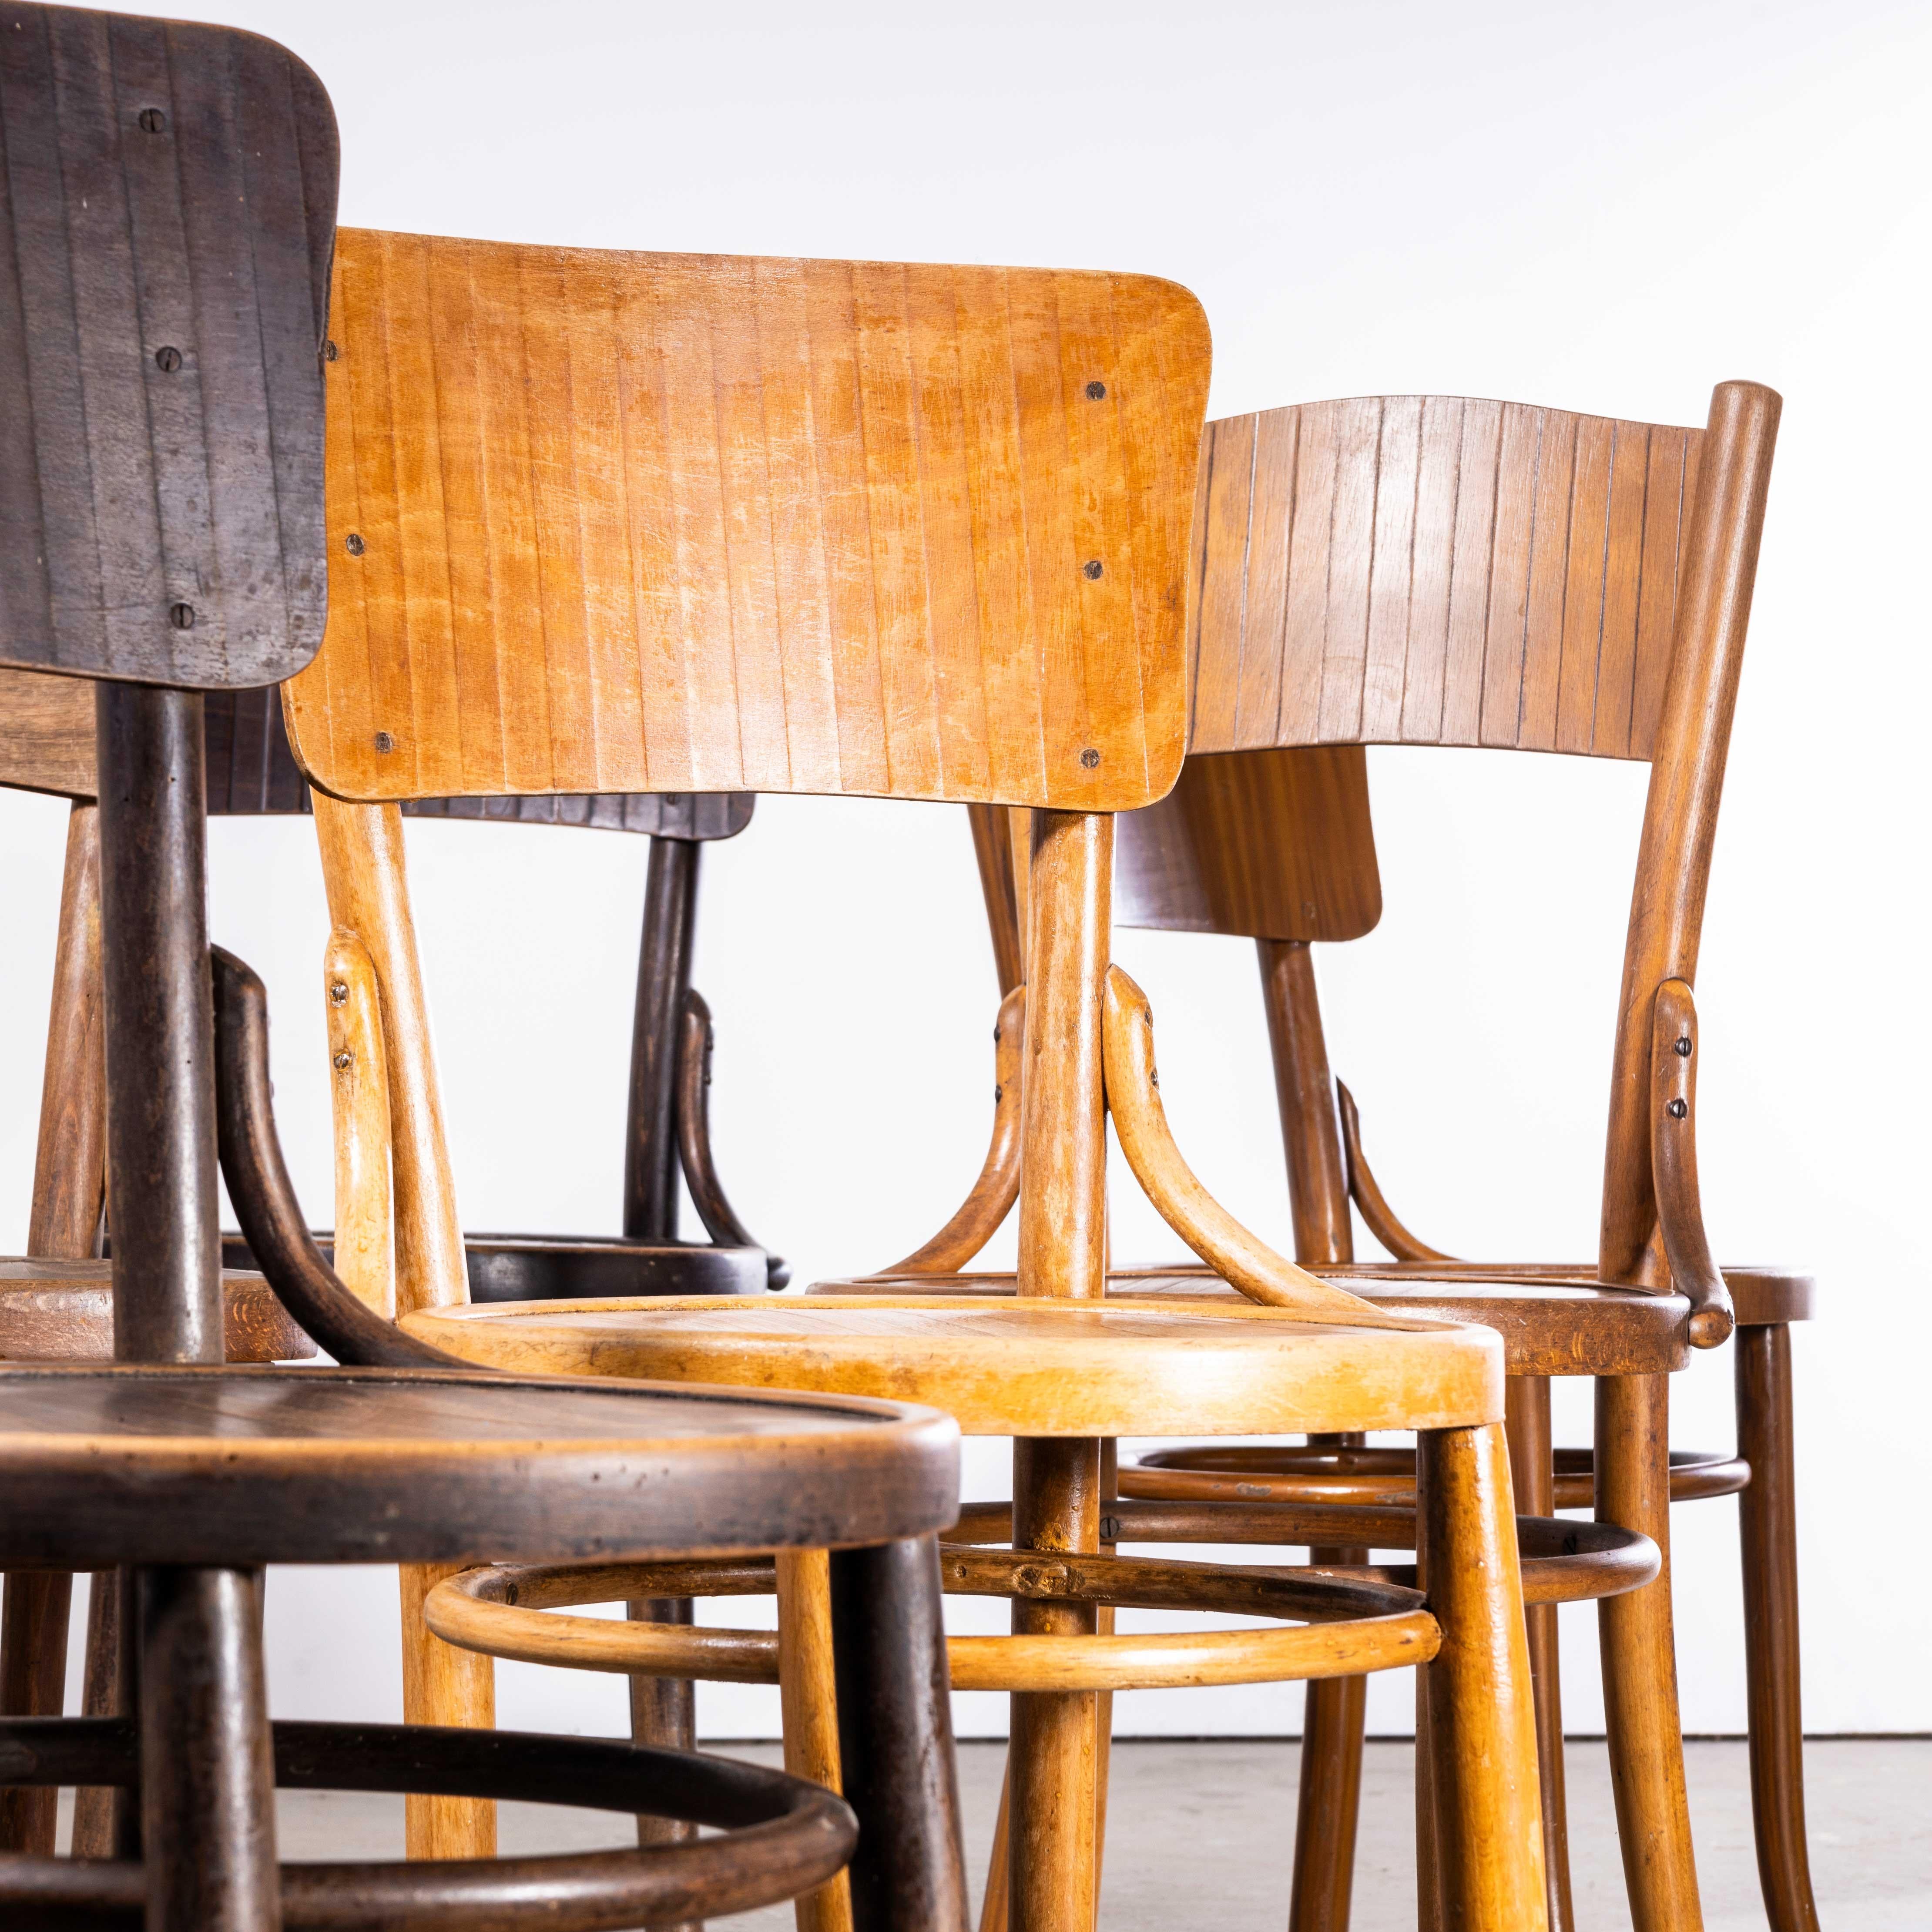 1940’s Bentwood Debrecen Panel Back Dining Chairs – Mixed – Set Of Ten
1940’s Bentwood Debrecen Panel Back Dining Chairs – Mixed – Set Of Ten. The chair is what we call a standard shape of classic ‘Panel Back’ chair from the 1940’s and 1950’s. The